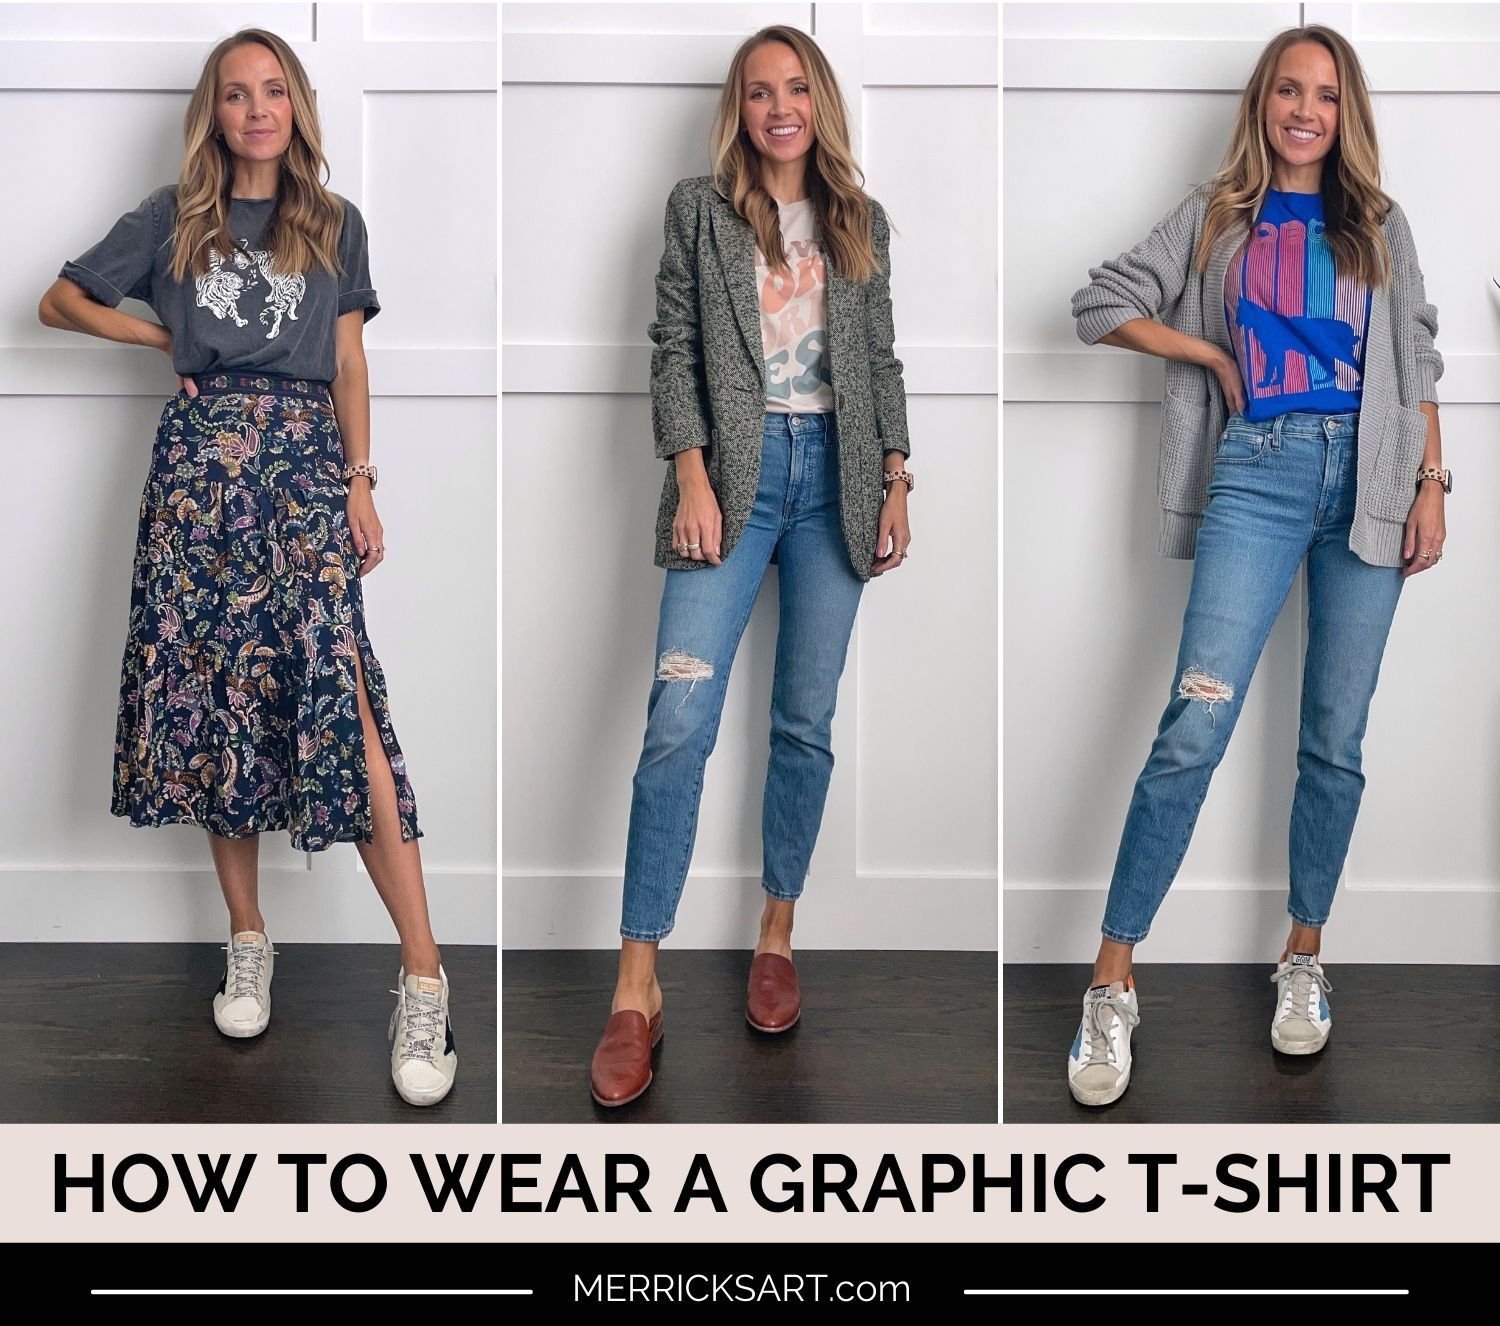 What To Wear Over A Graphic T-shirt? – AlanBalen